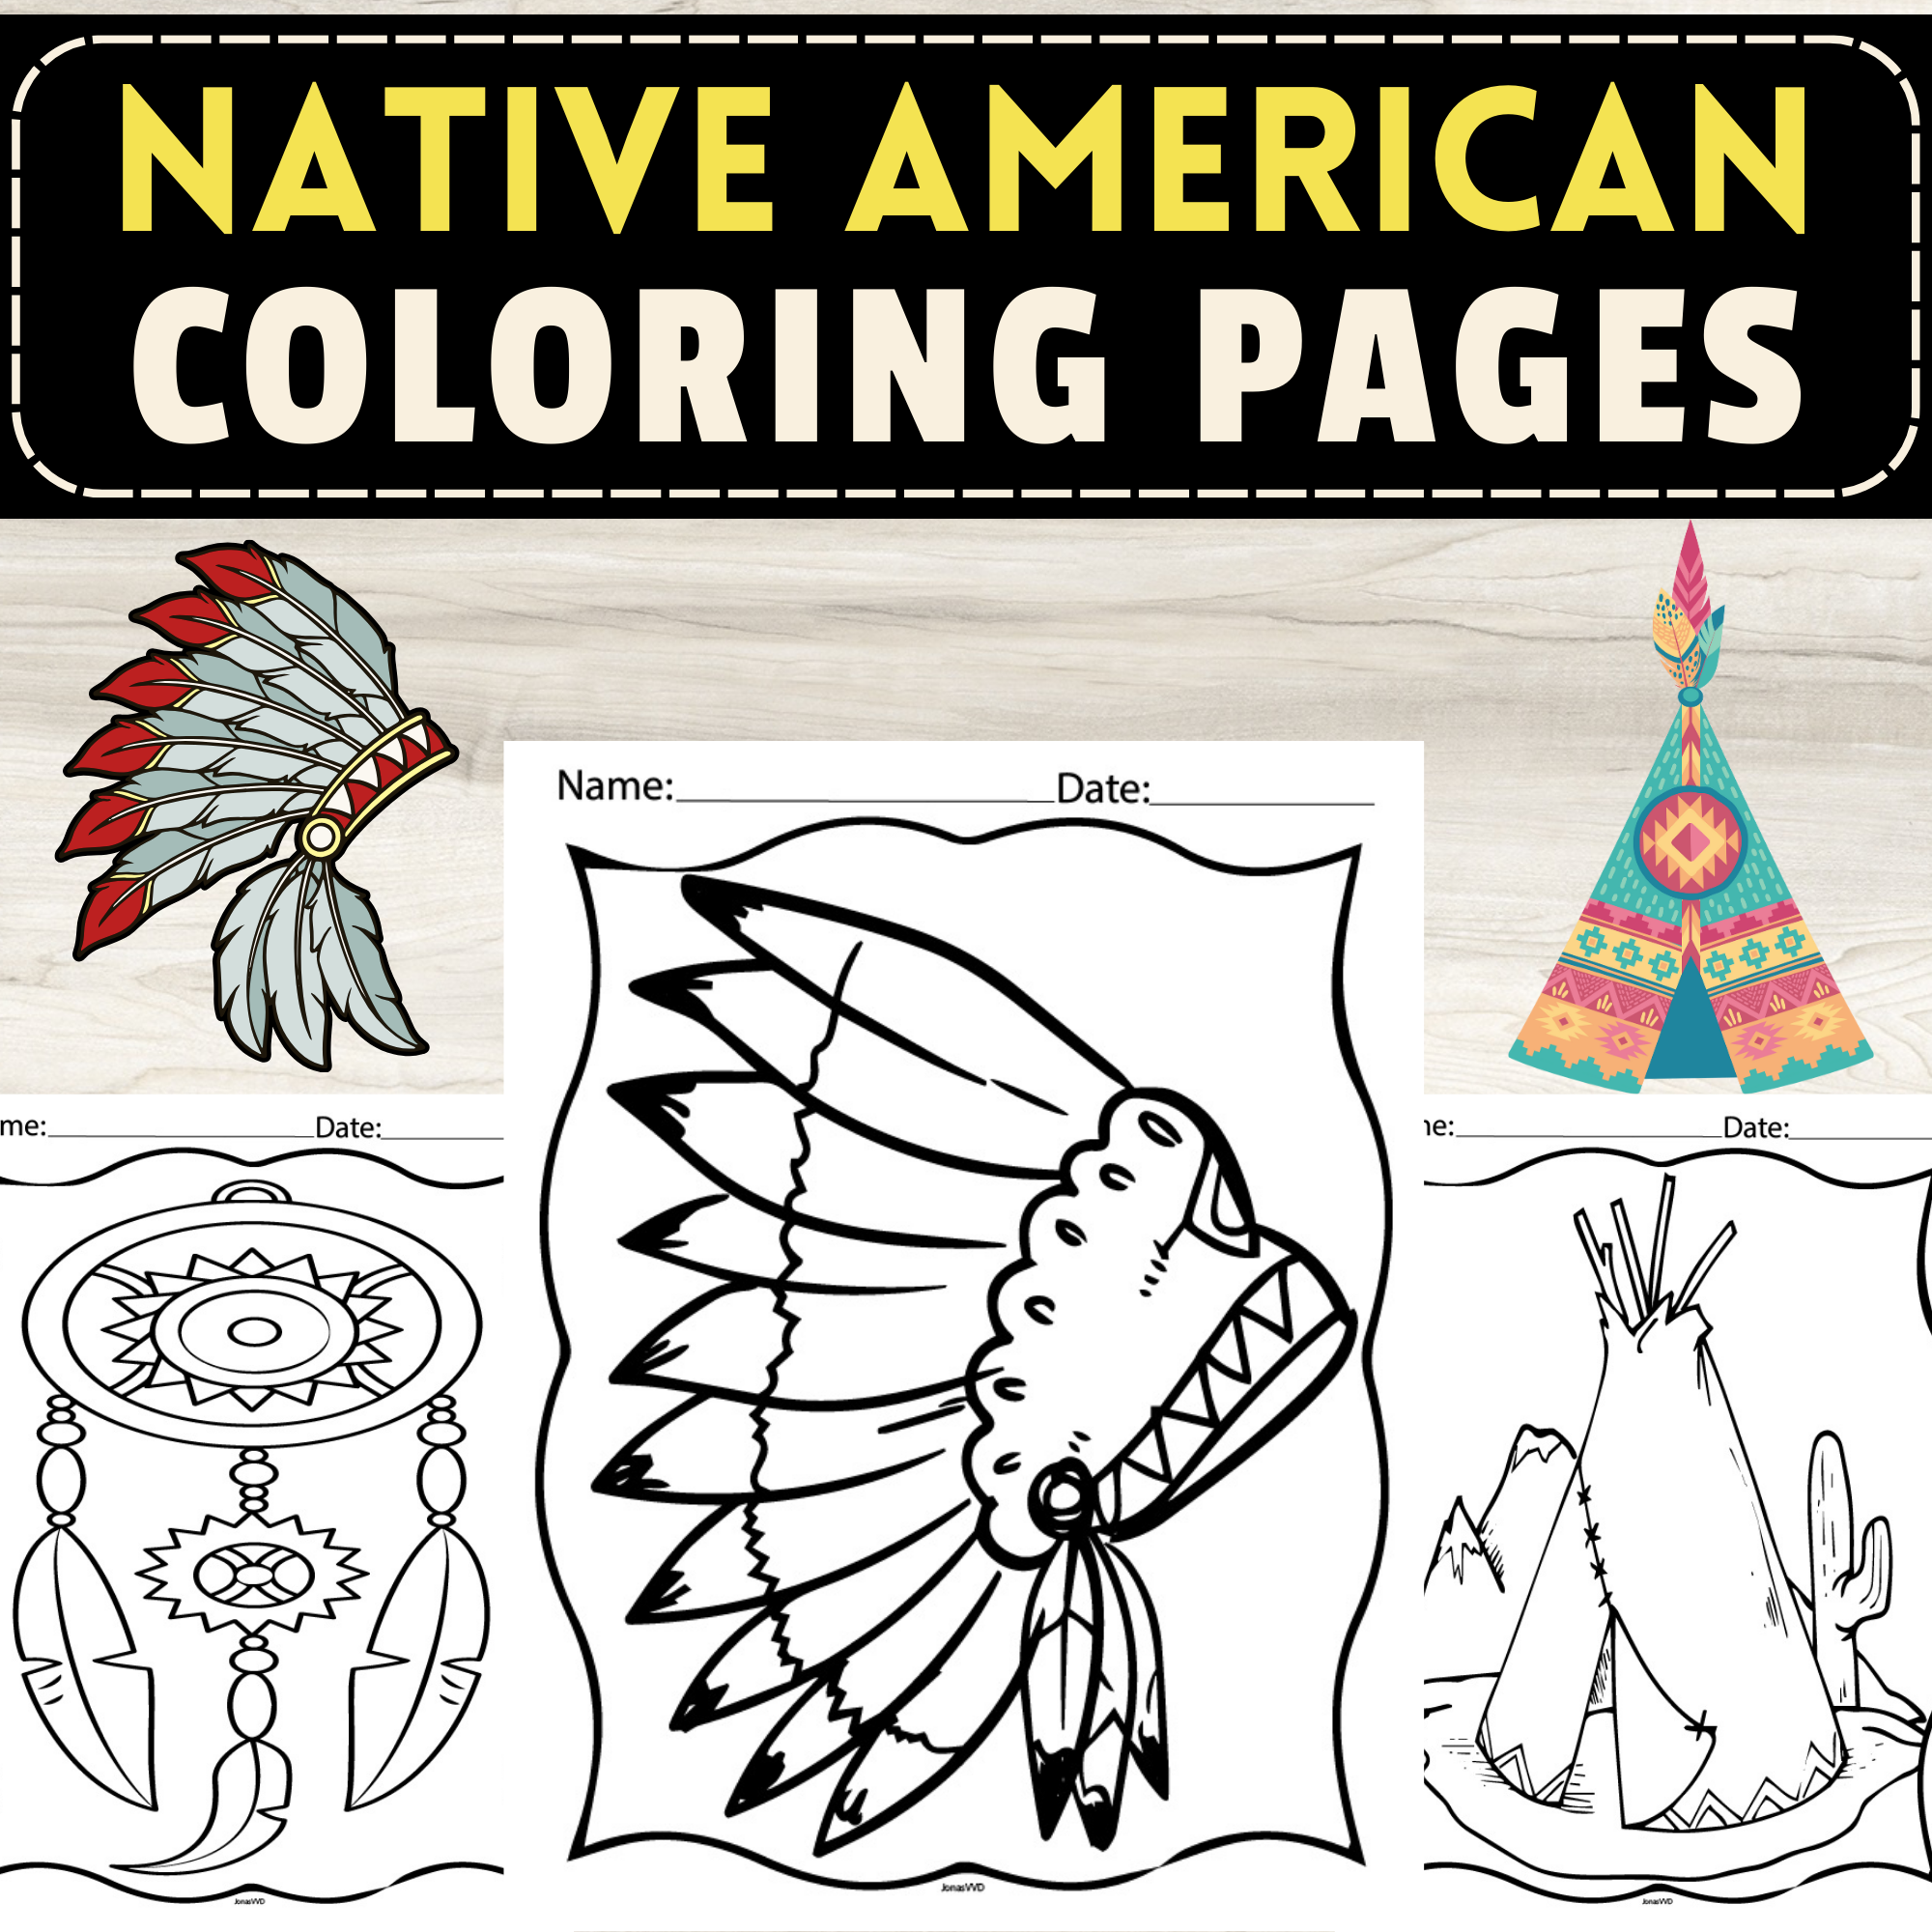 Native american day coloring pages cultural designs made by teachers